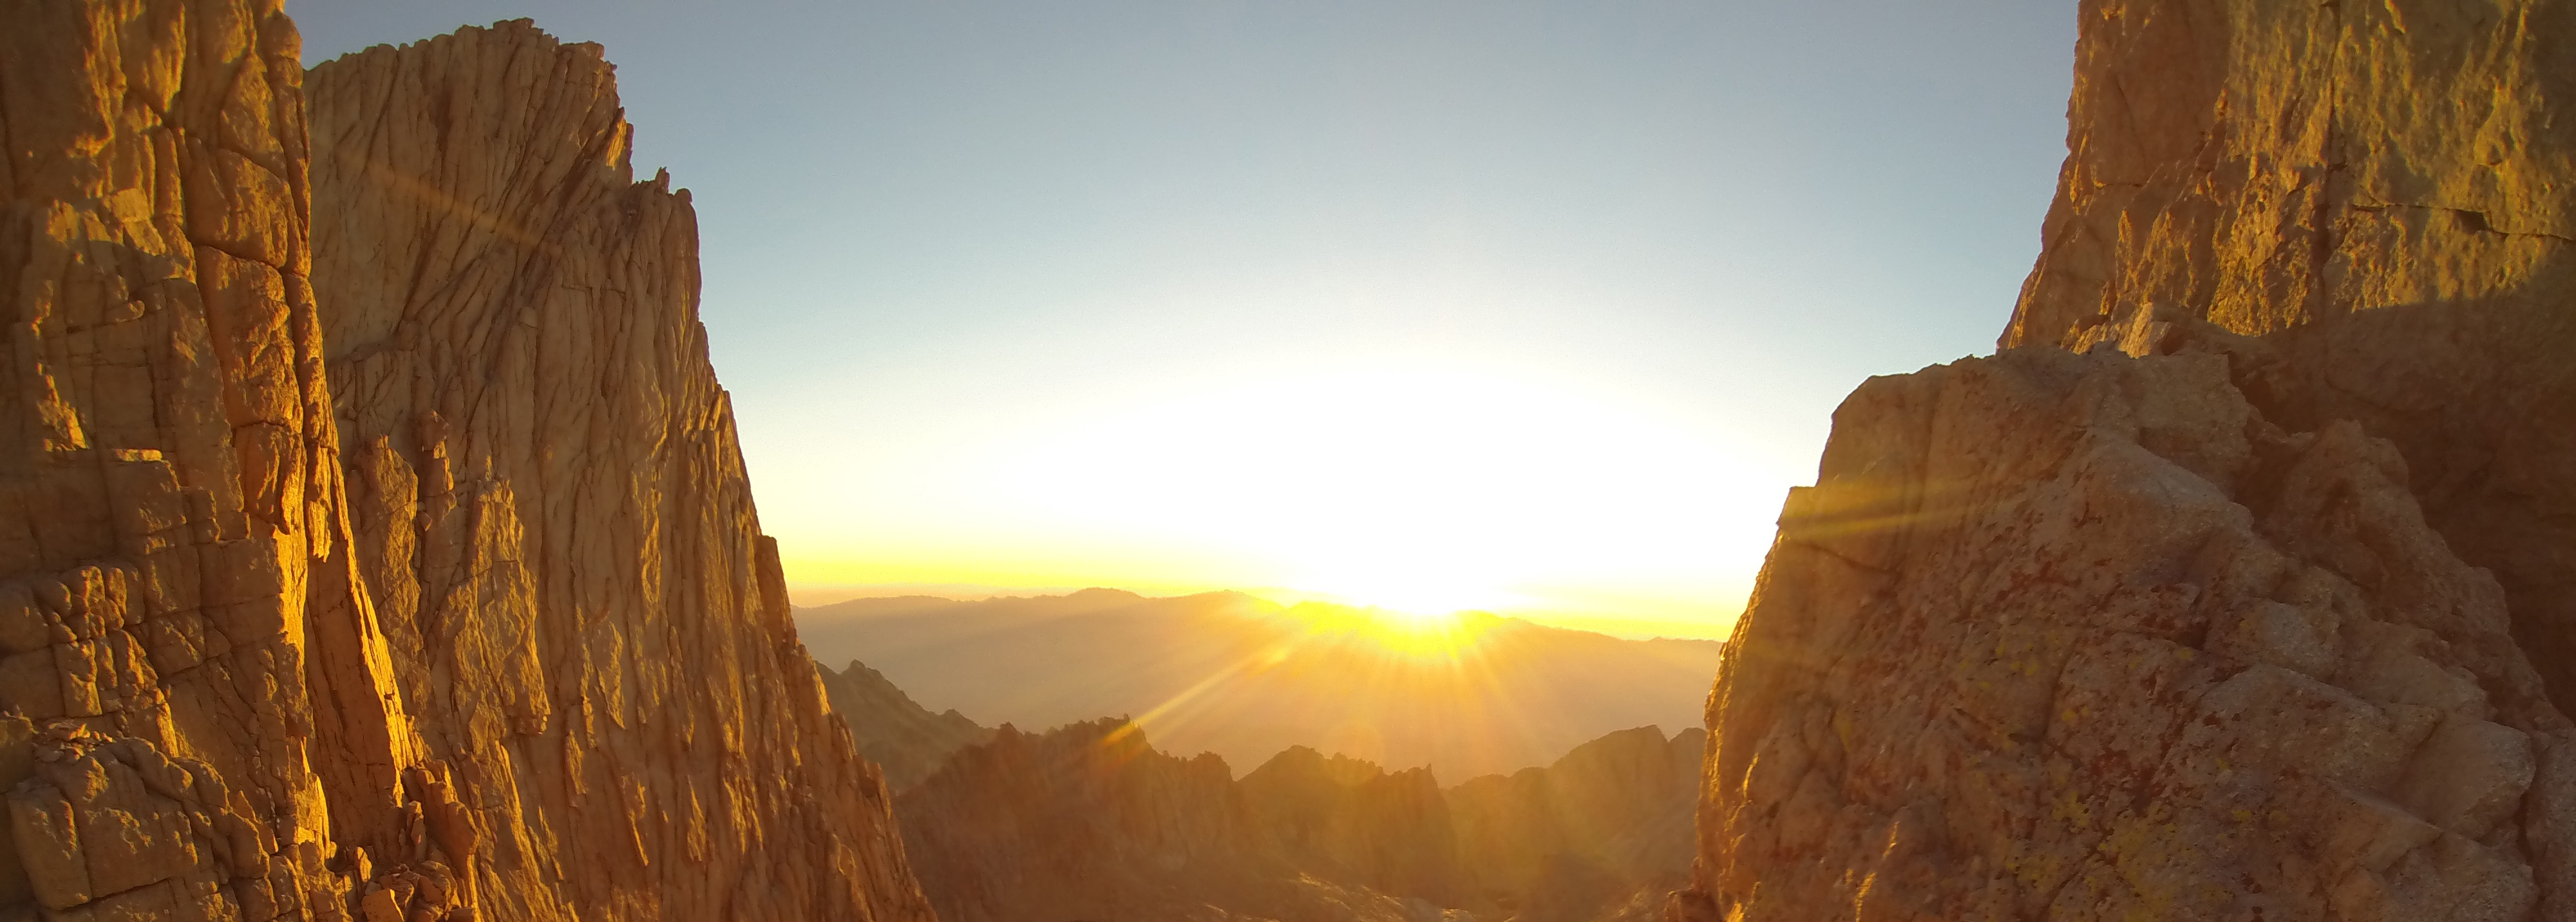 Seeing and Climbing Mt. Whitney - Sequoia & Kings Canyon National